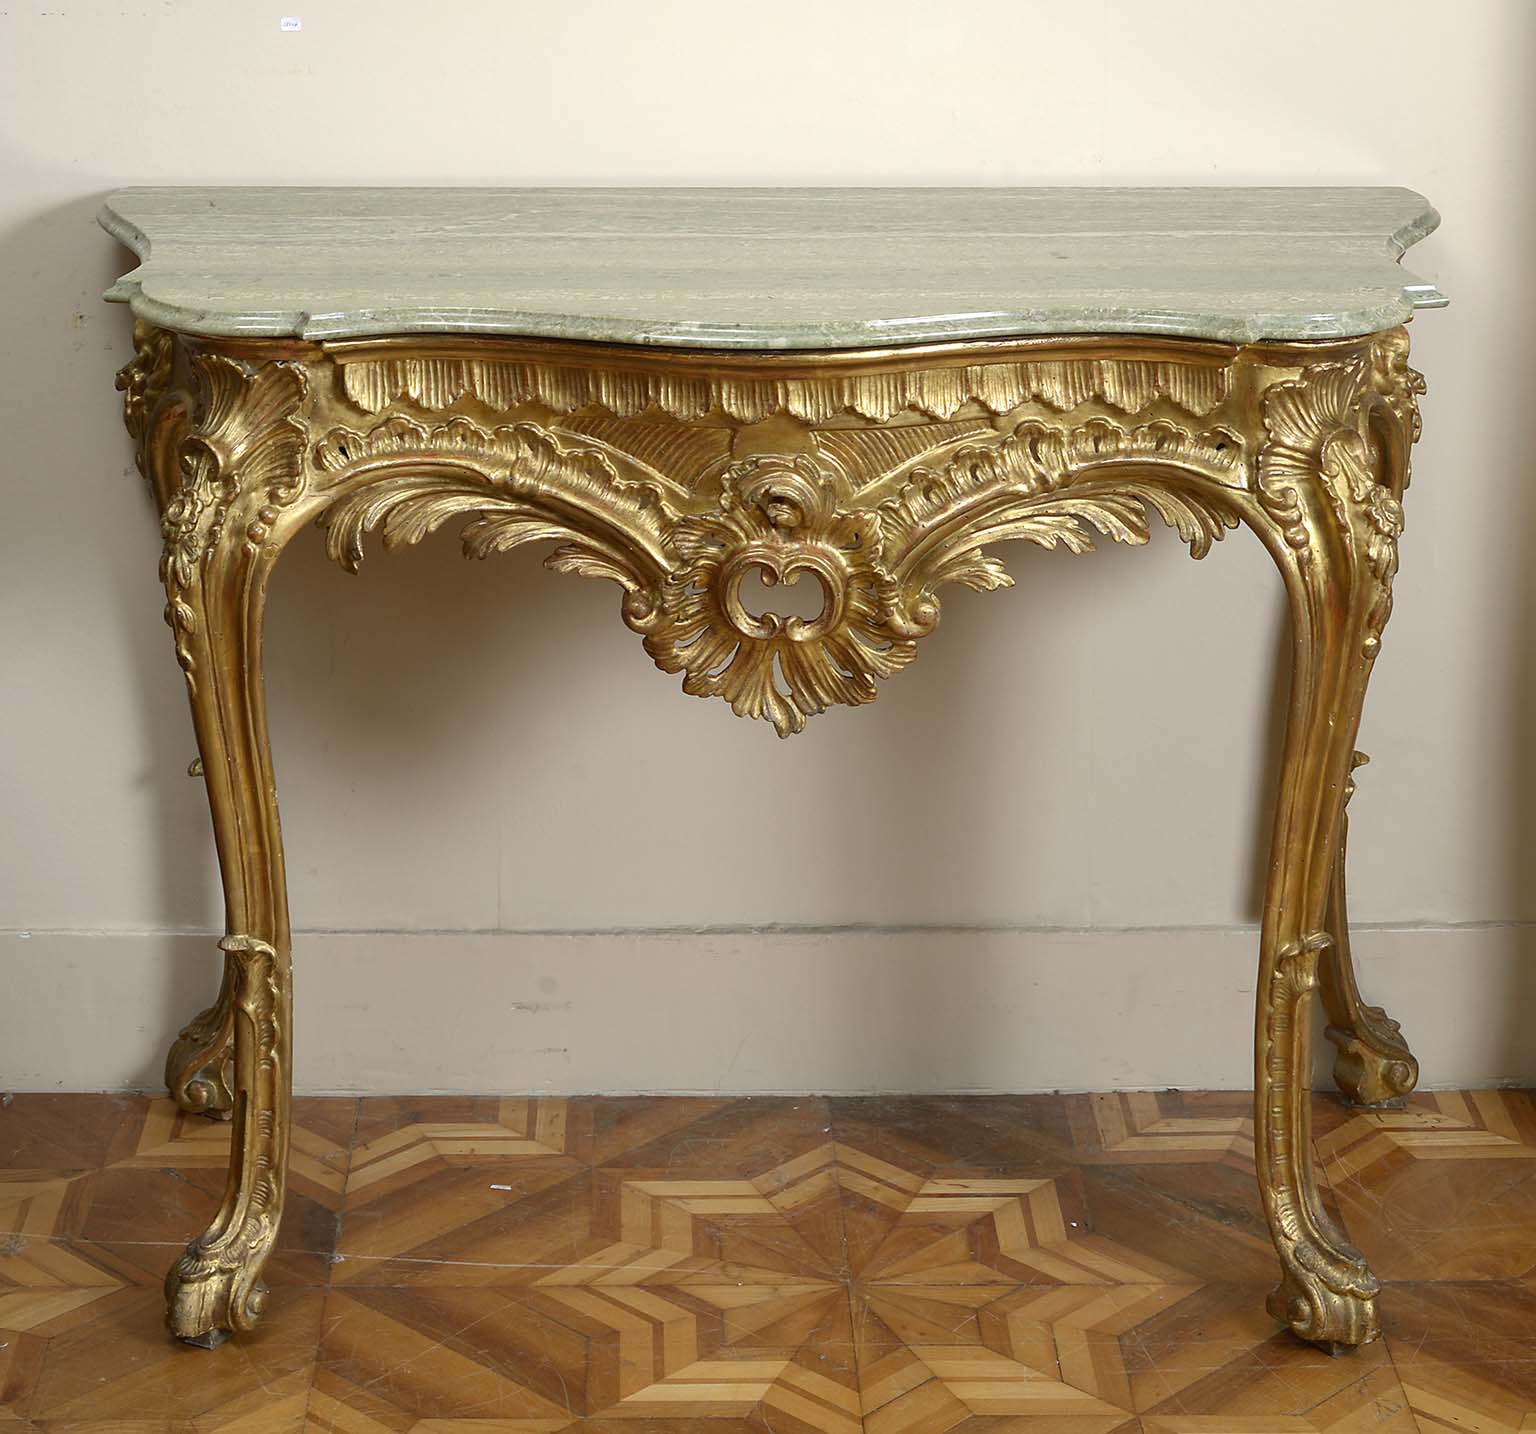 A Neopolitan Silver Gilt and Giltwood Console Table